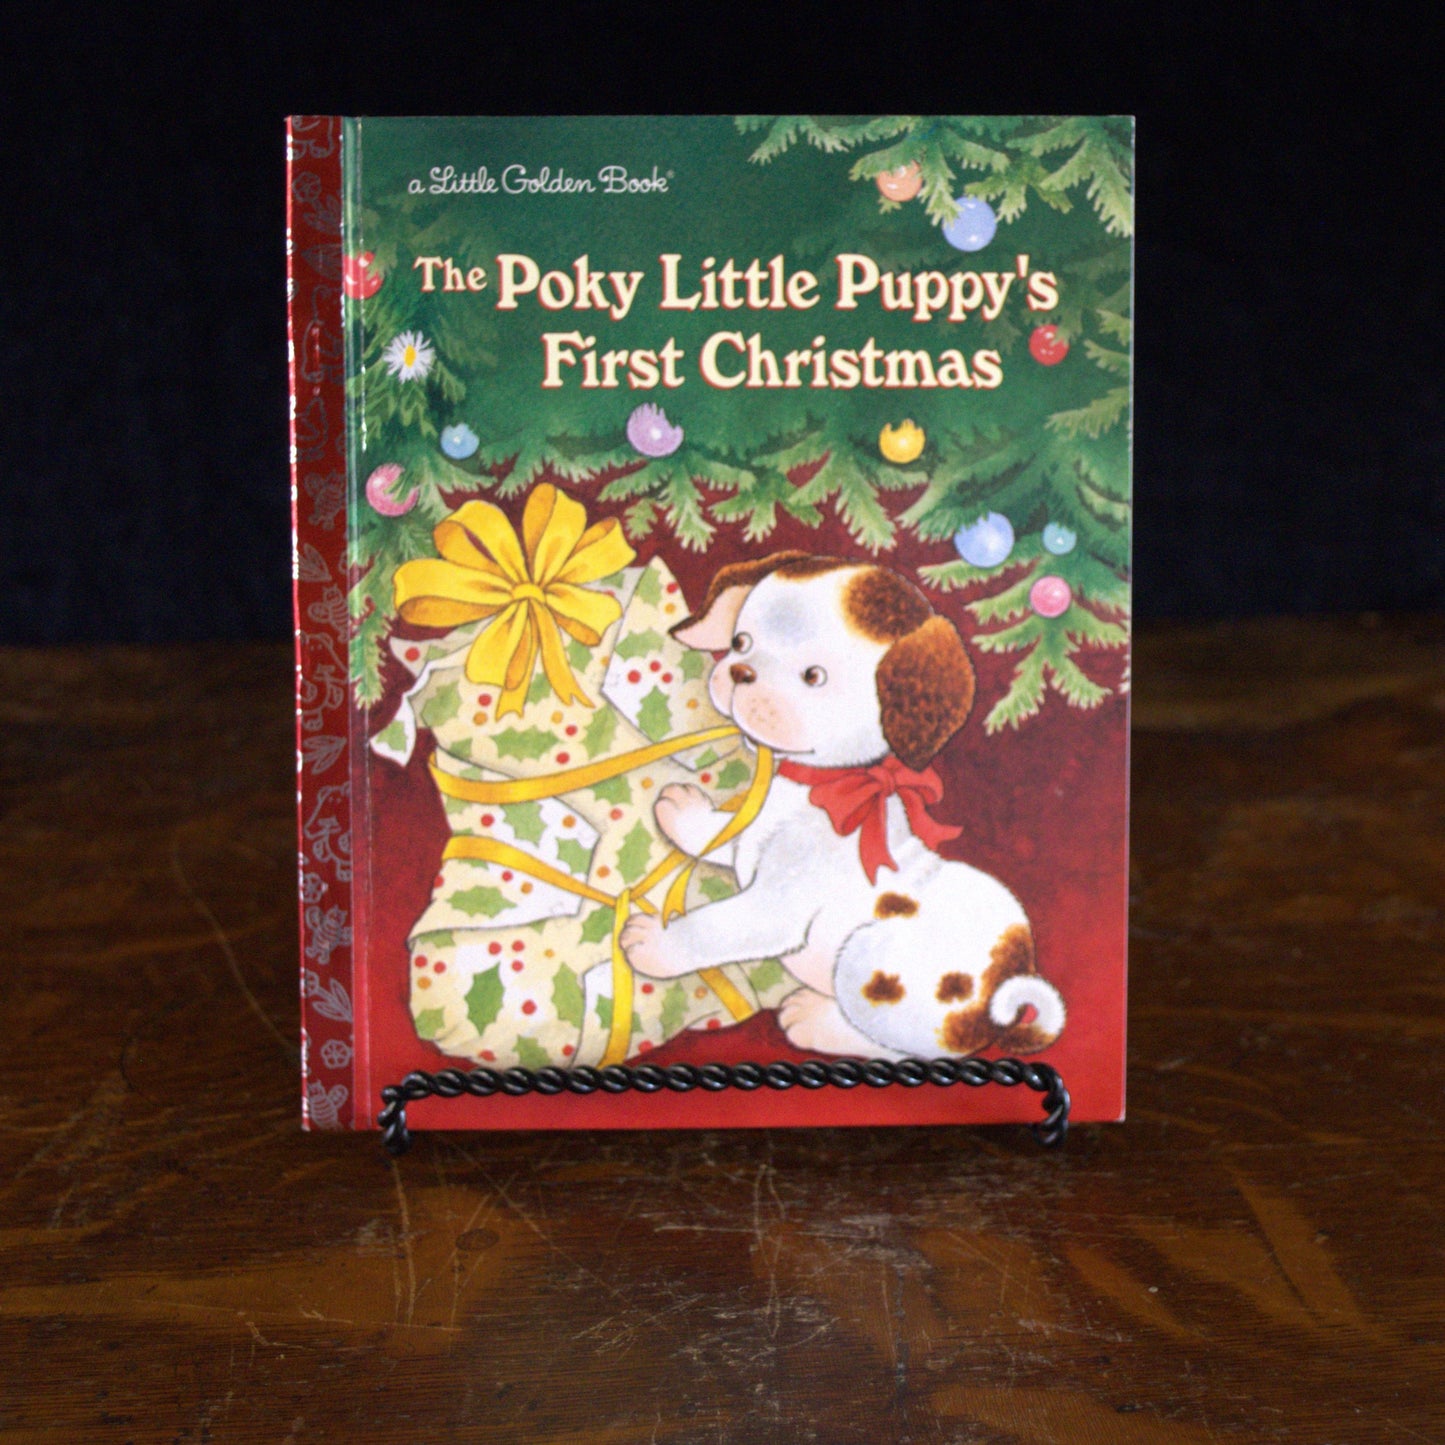 The Poky Little Puppy's First Christmas Book